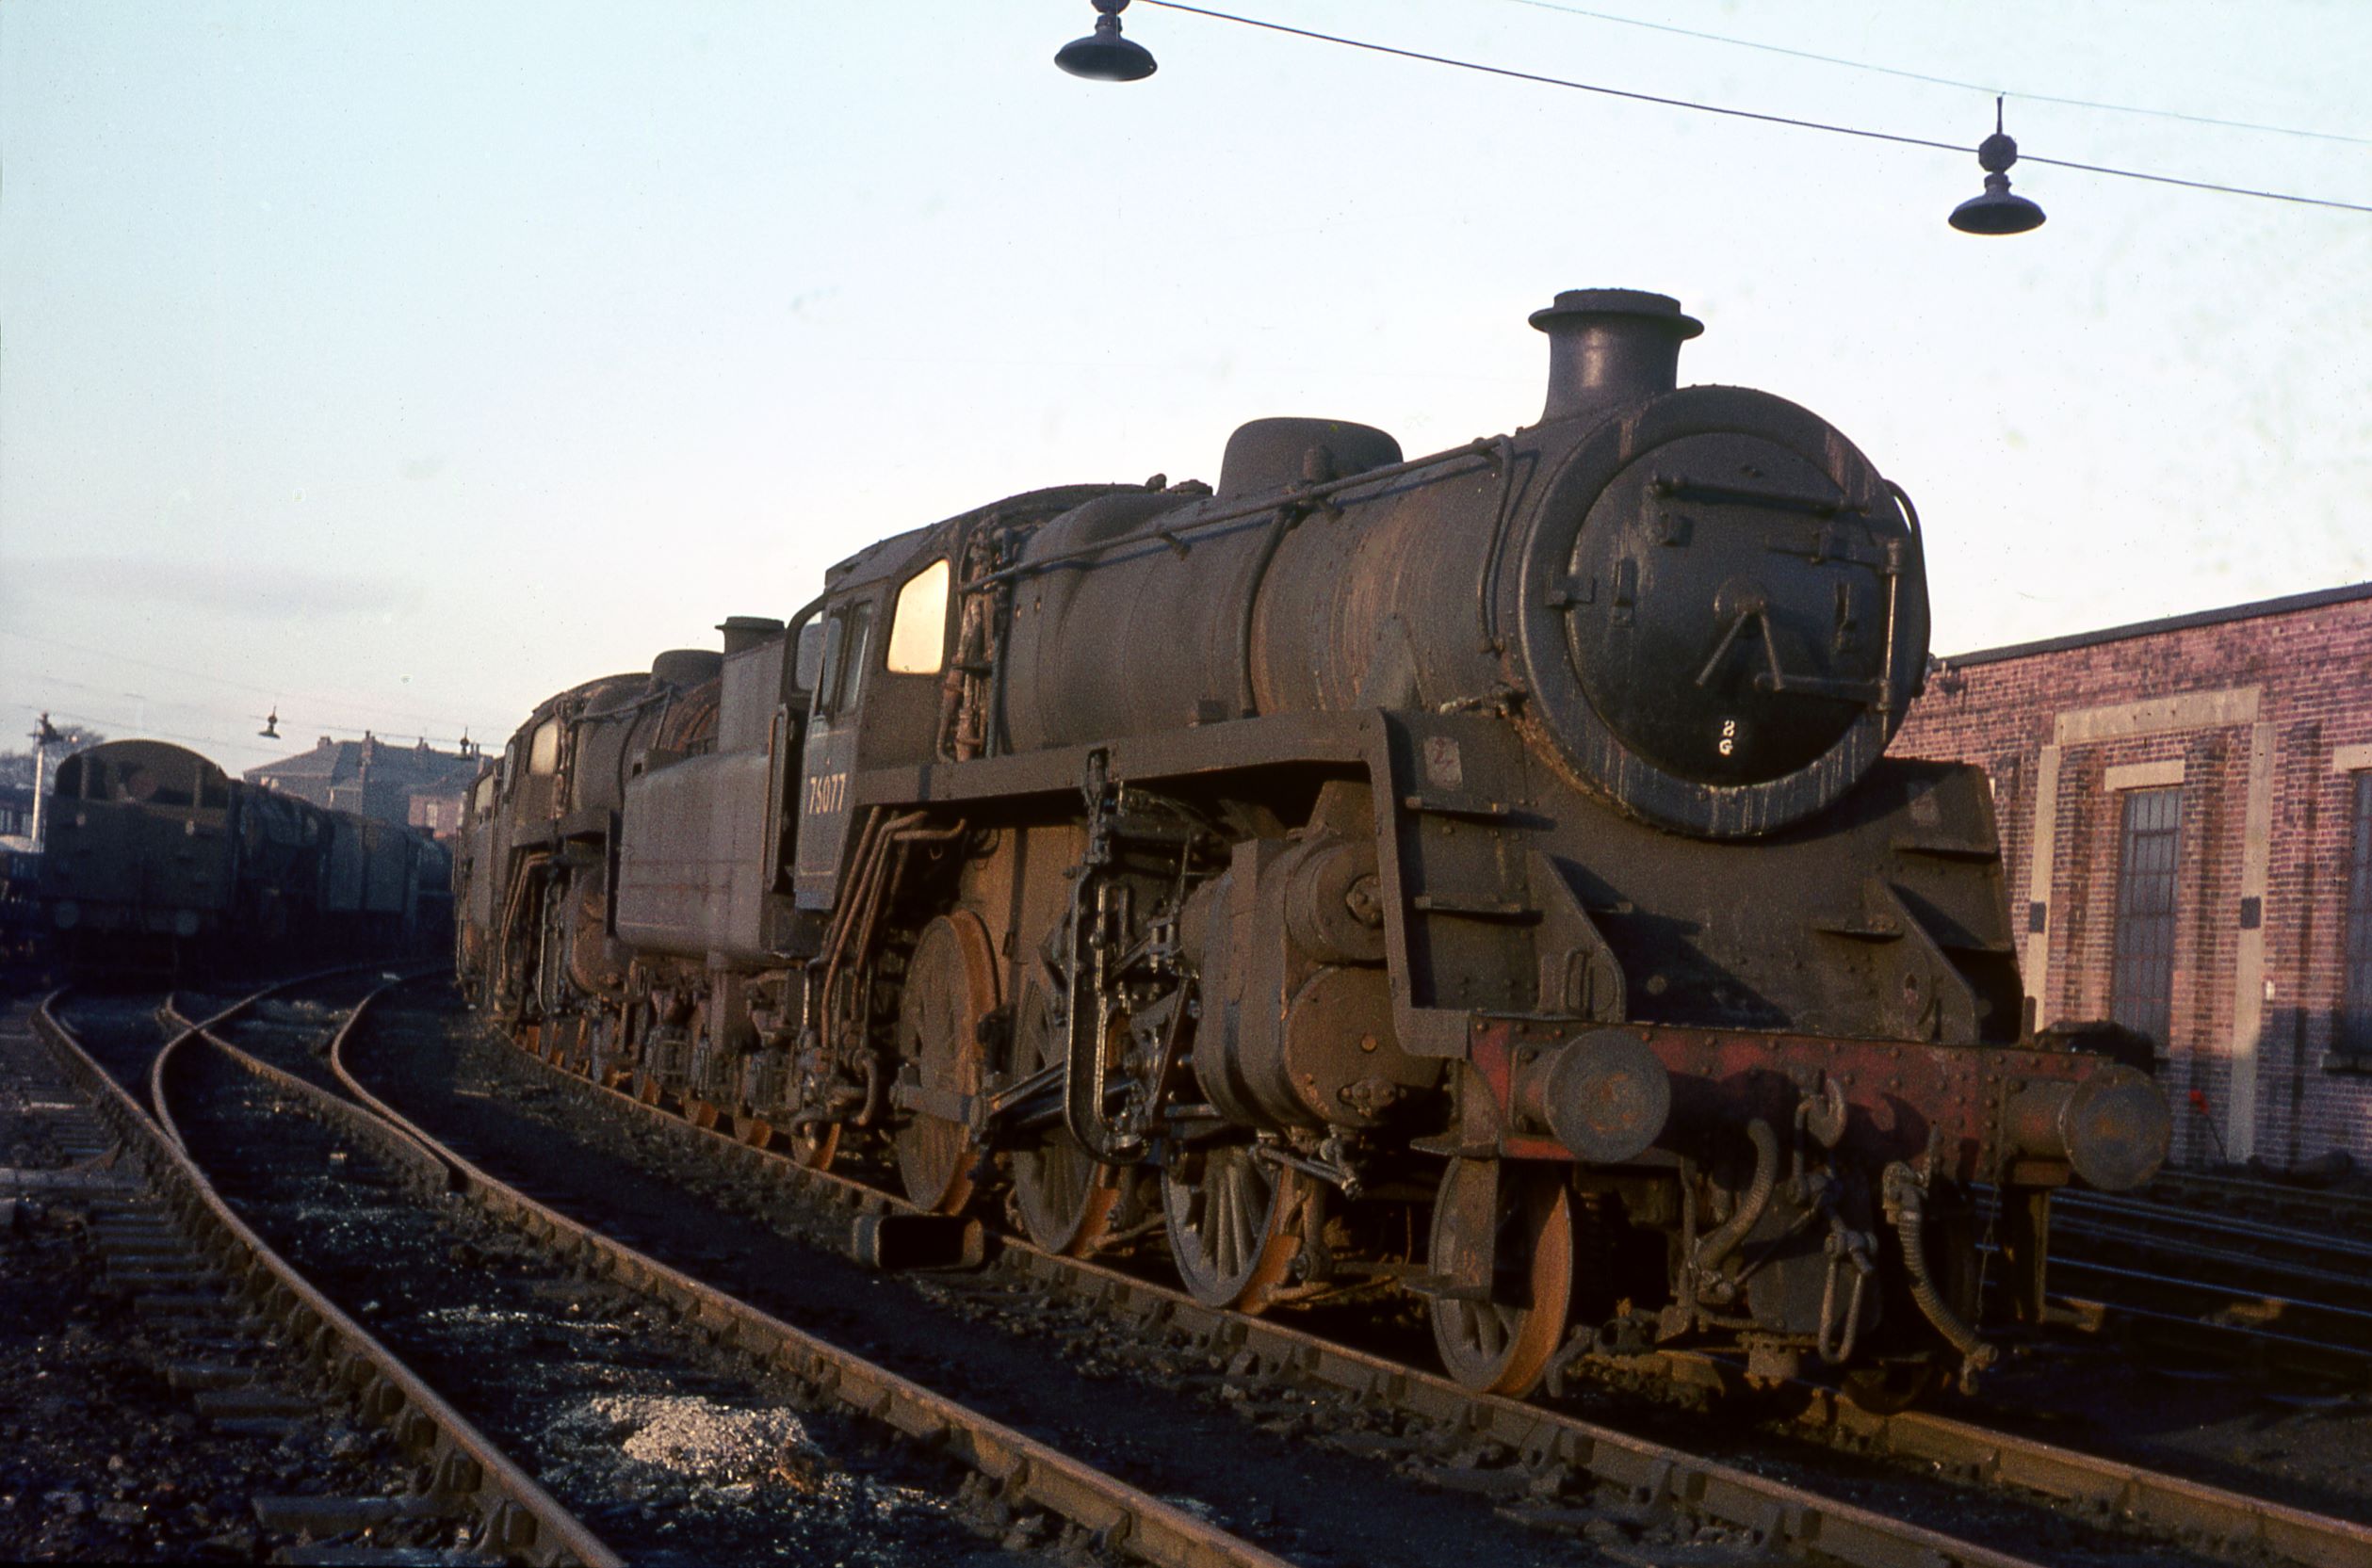 76077 awaiting its fate at Springs Branch 29 December 1967